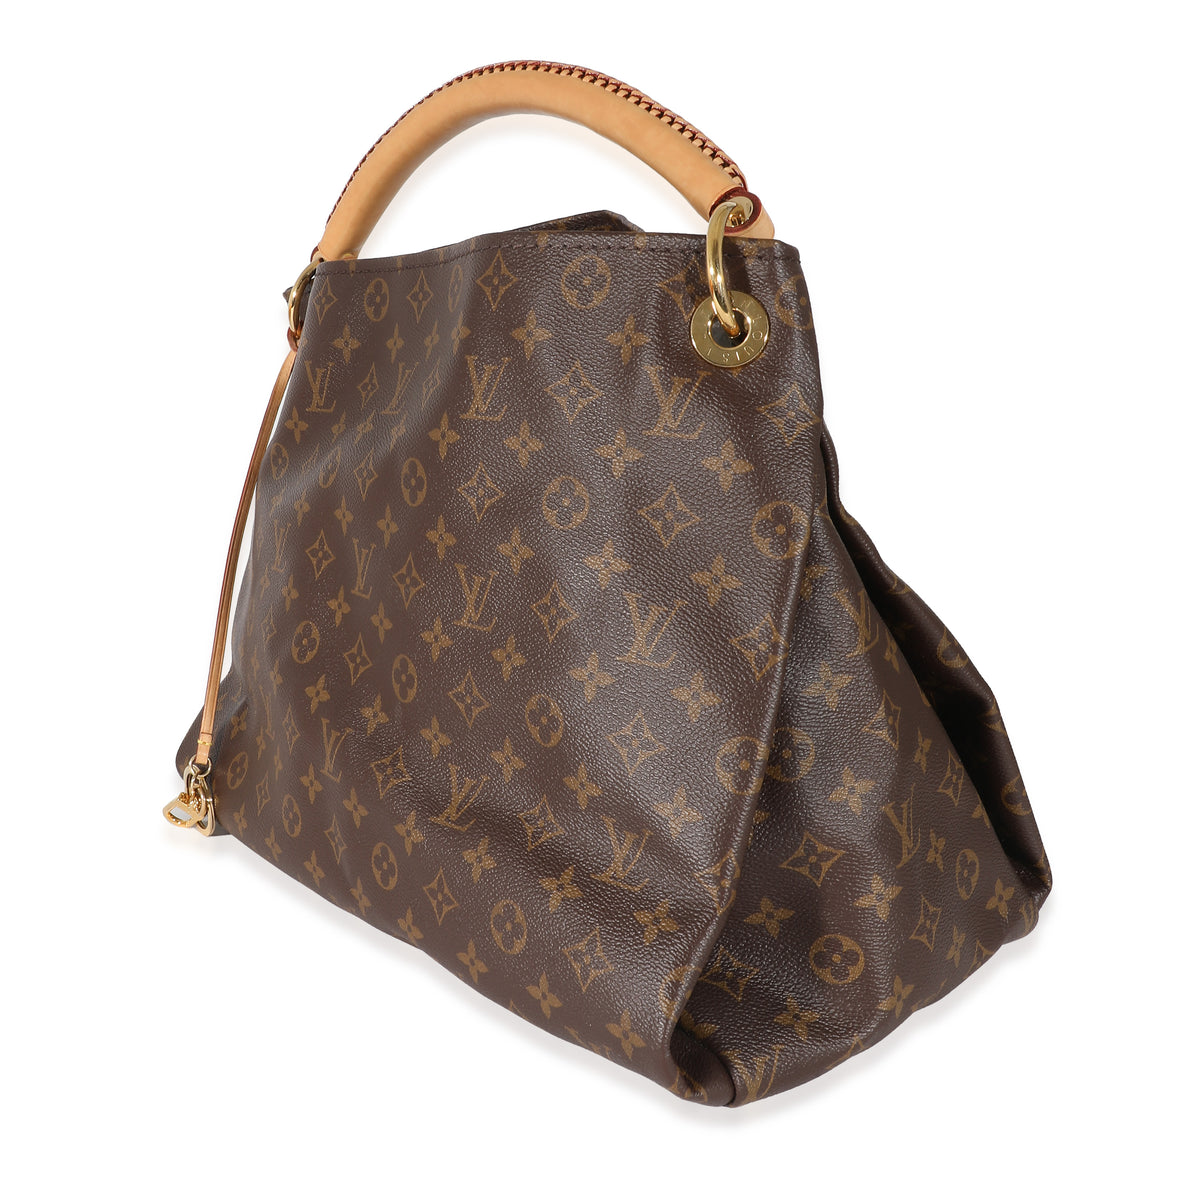 A Guide to Authenticating the Louis Vuitton Artsy (Authenticating Louis  Vuitton) See more